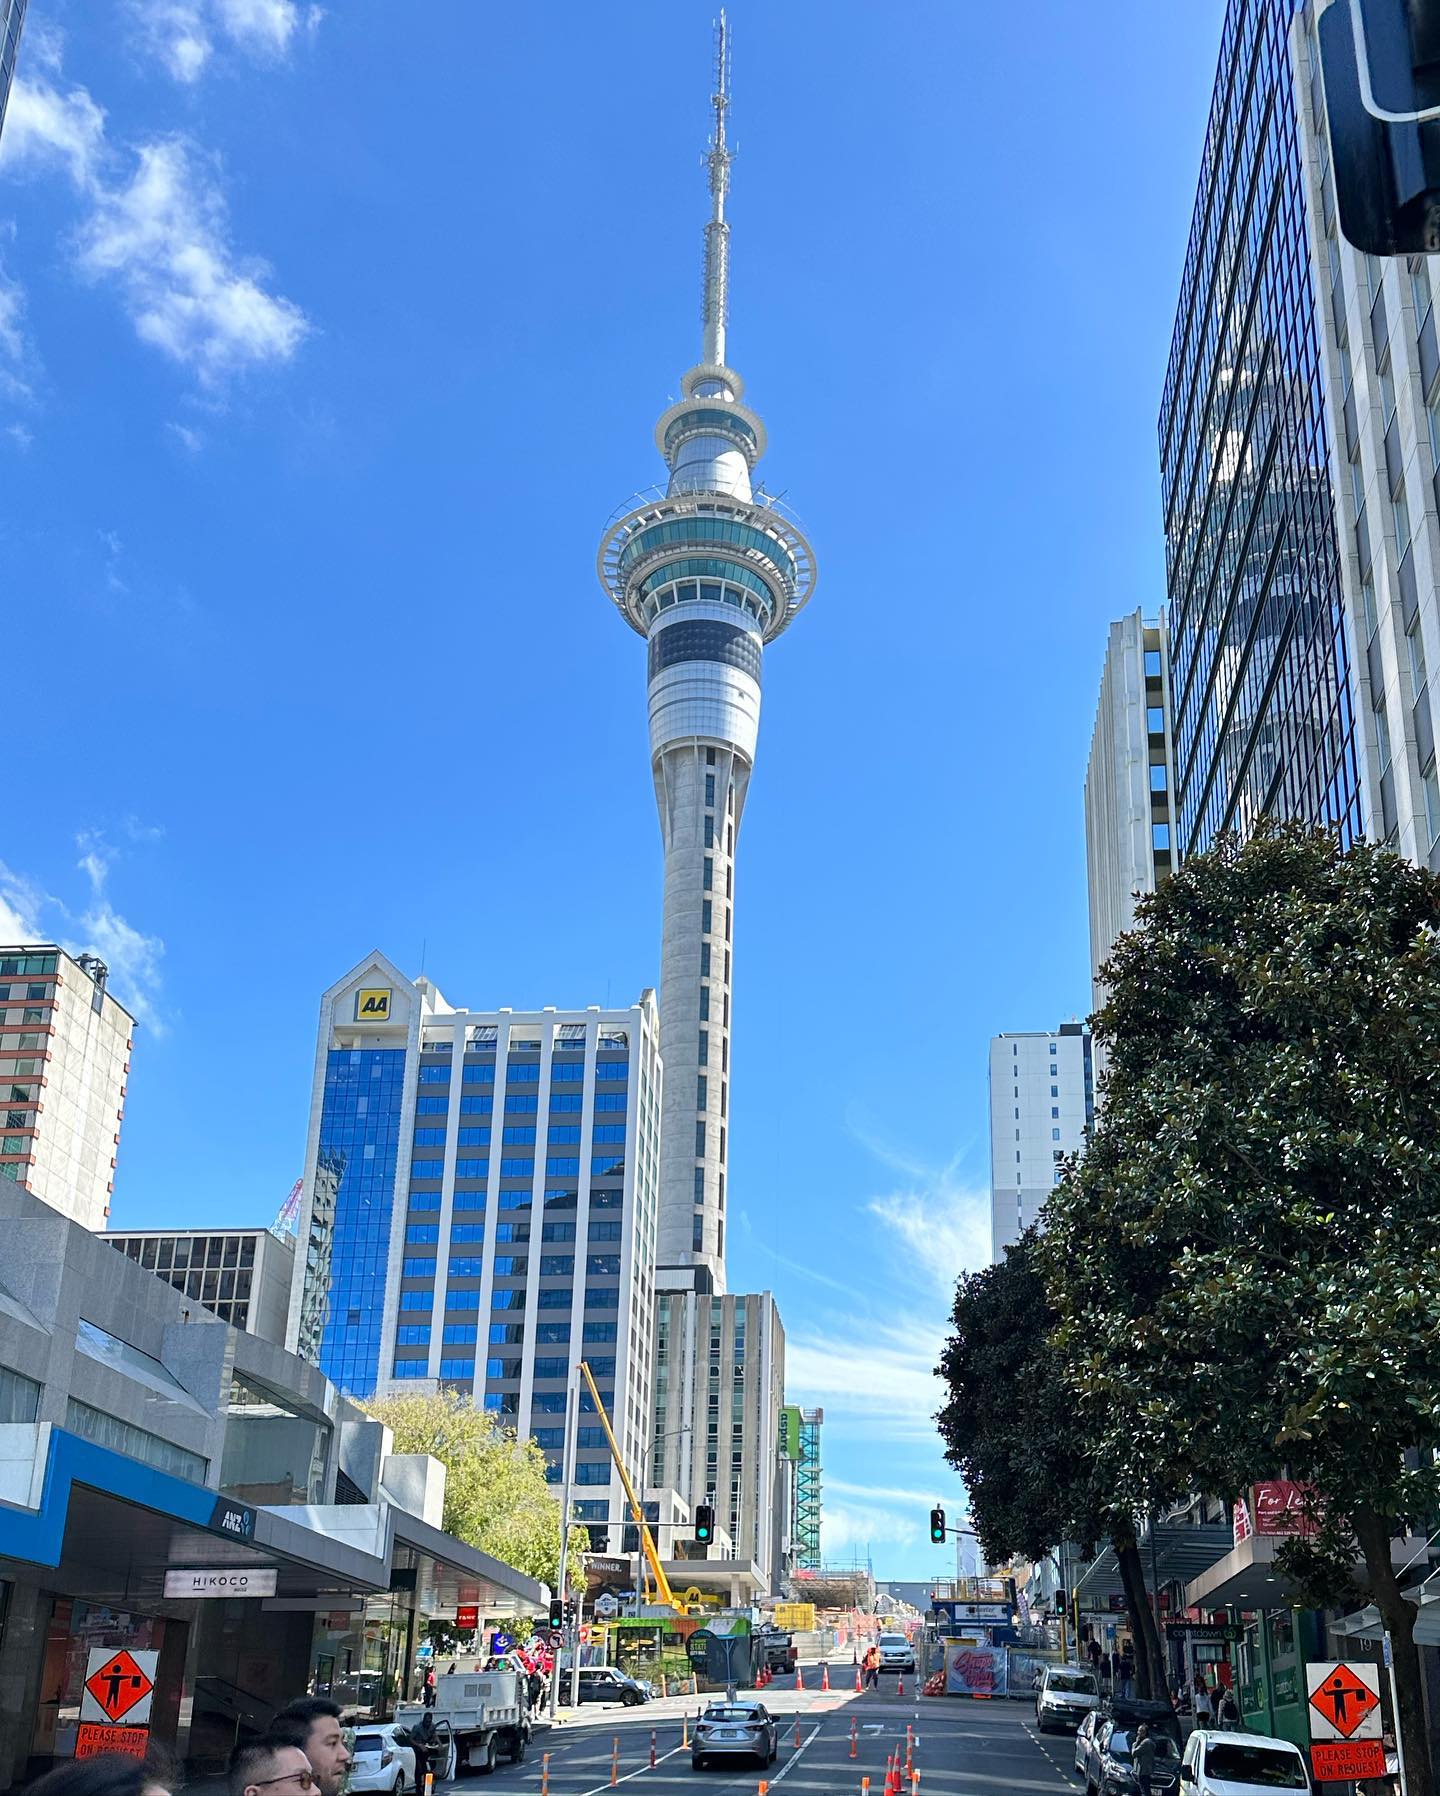 New Zealand itinerary for winter activities 2023 - Auckland Sky Tower